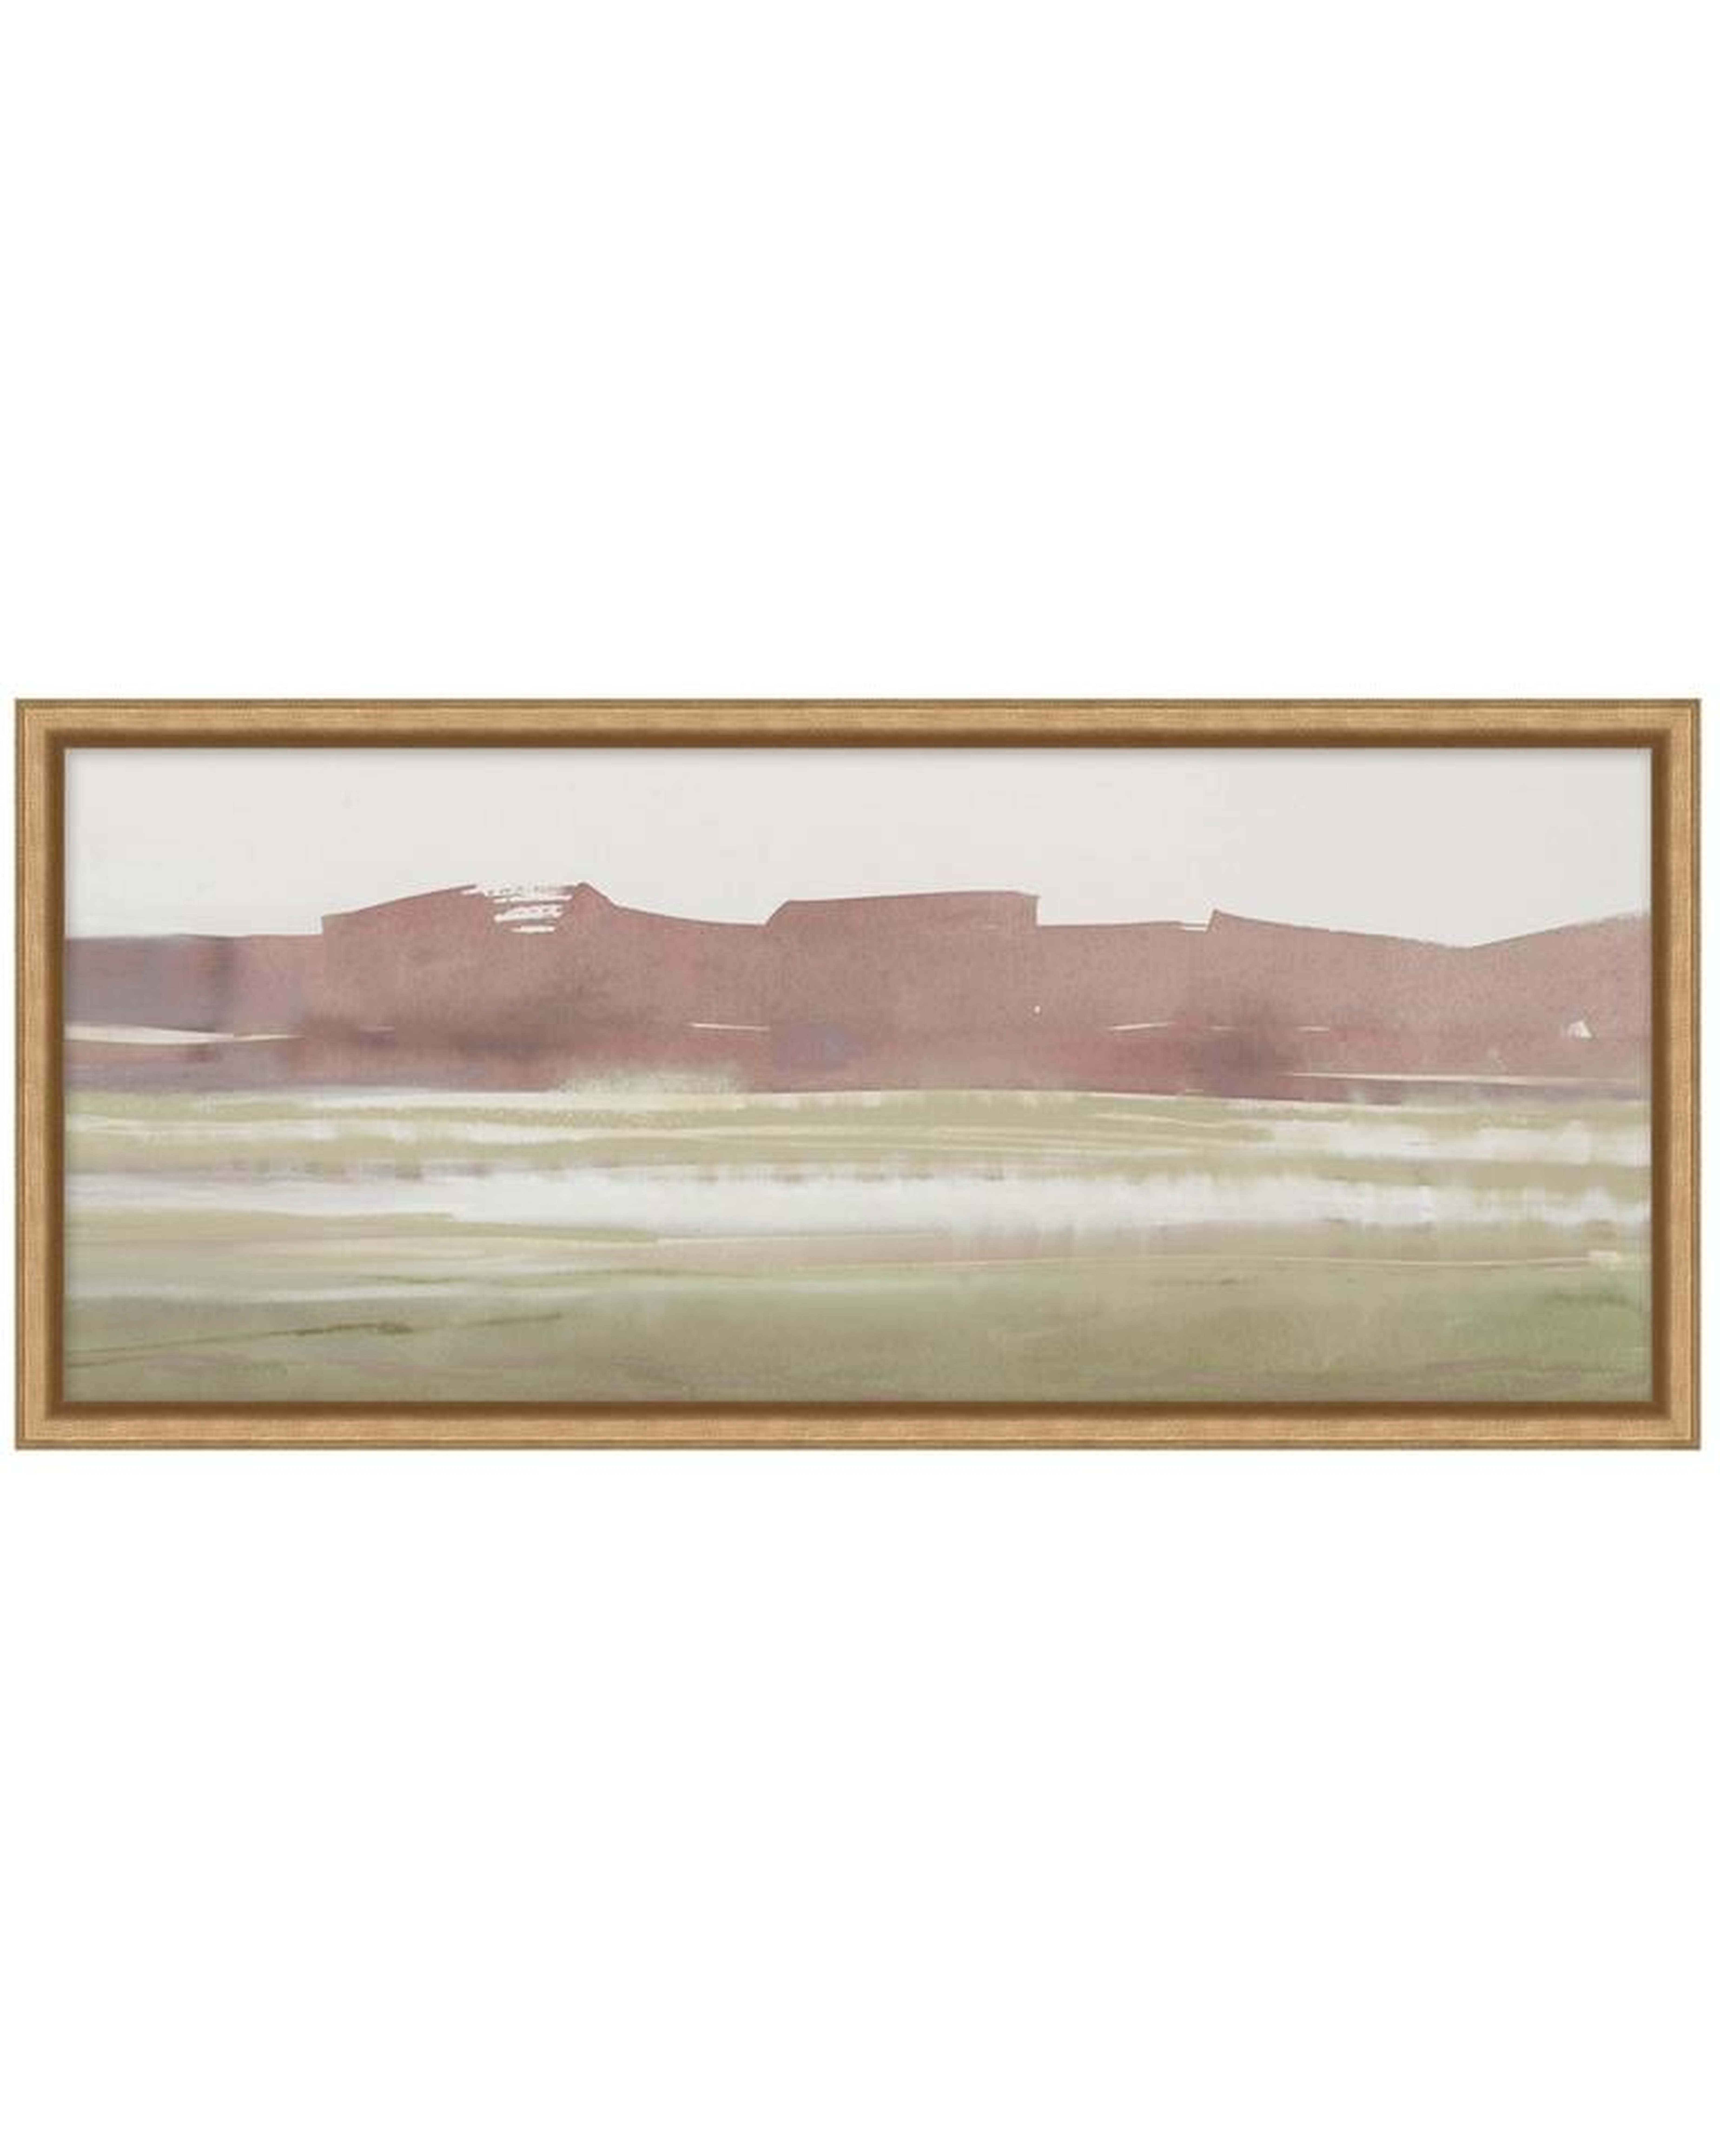 ABSTRACT LANDSCAPE 3 Framed Art - Small - McGee & Co.